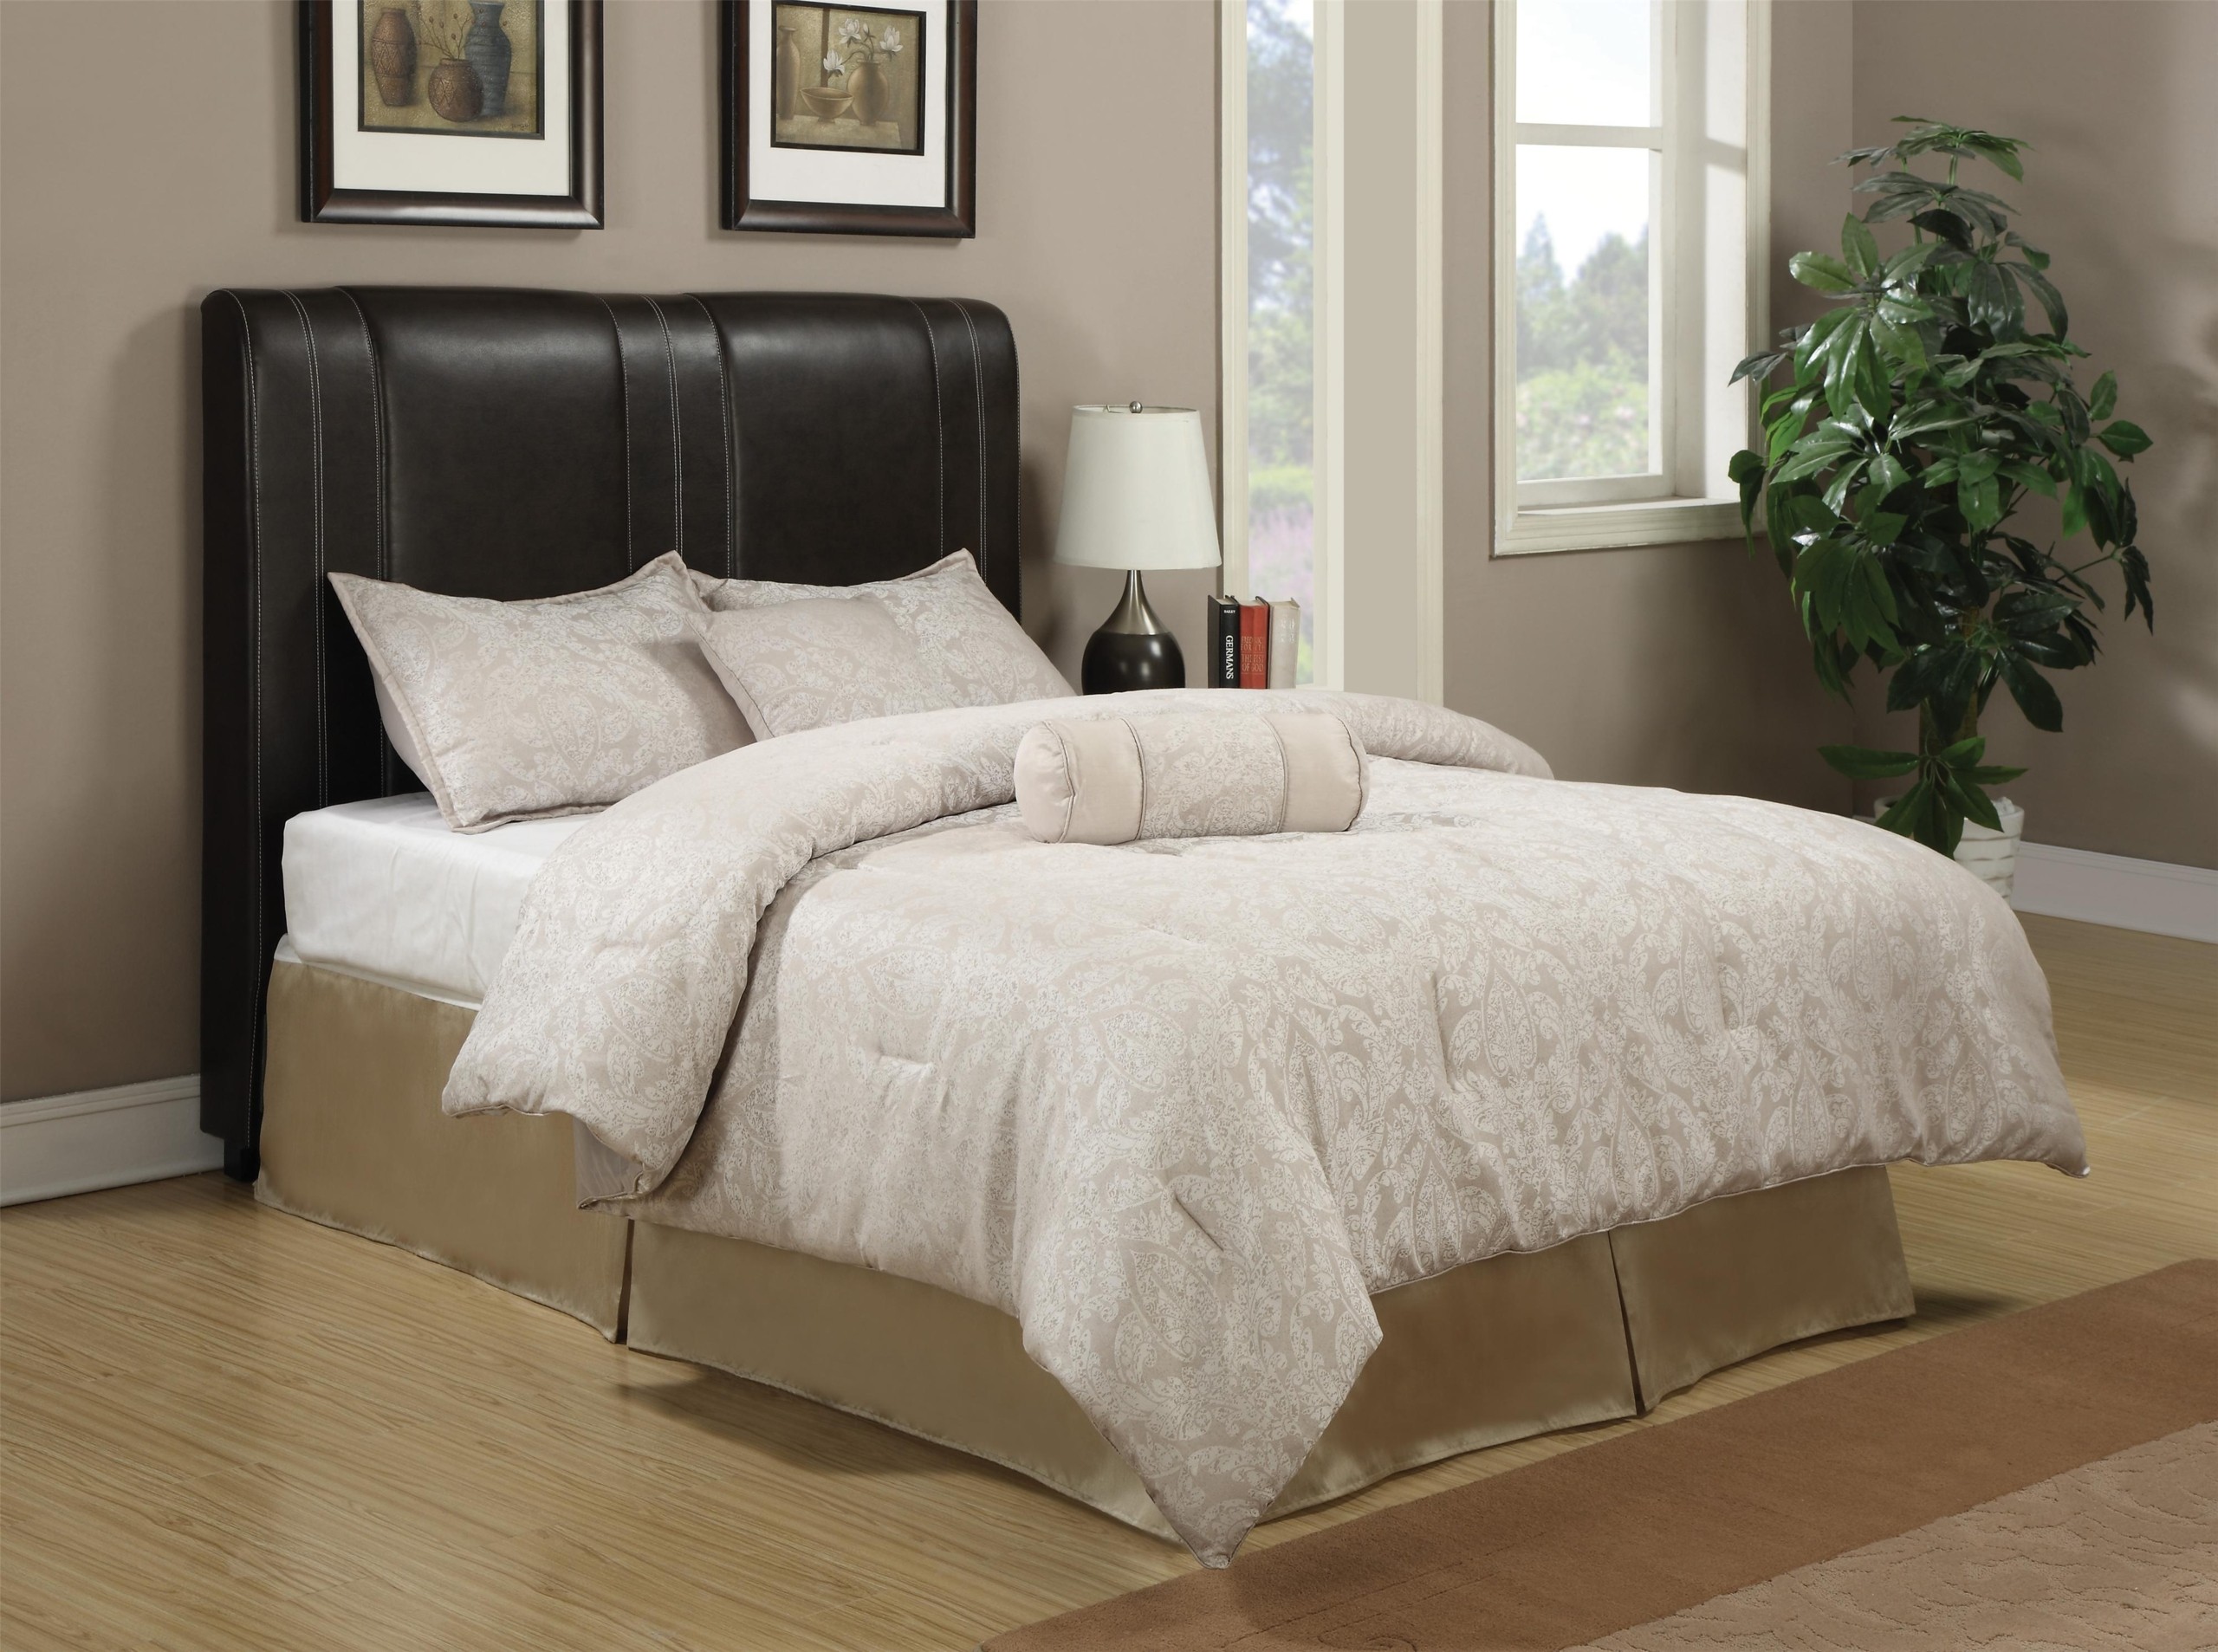 Upholstered beds twin caleb upholstered headboard in dark